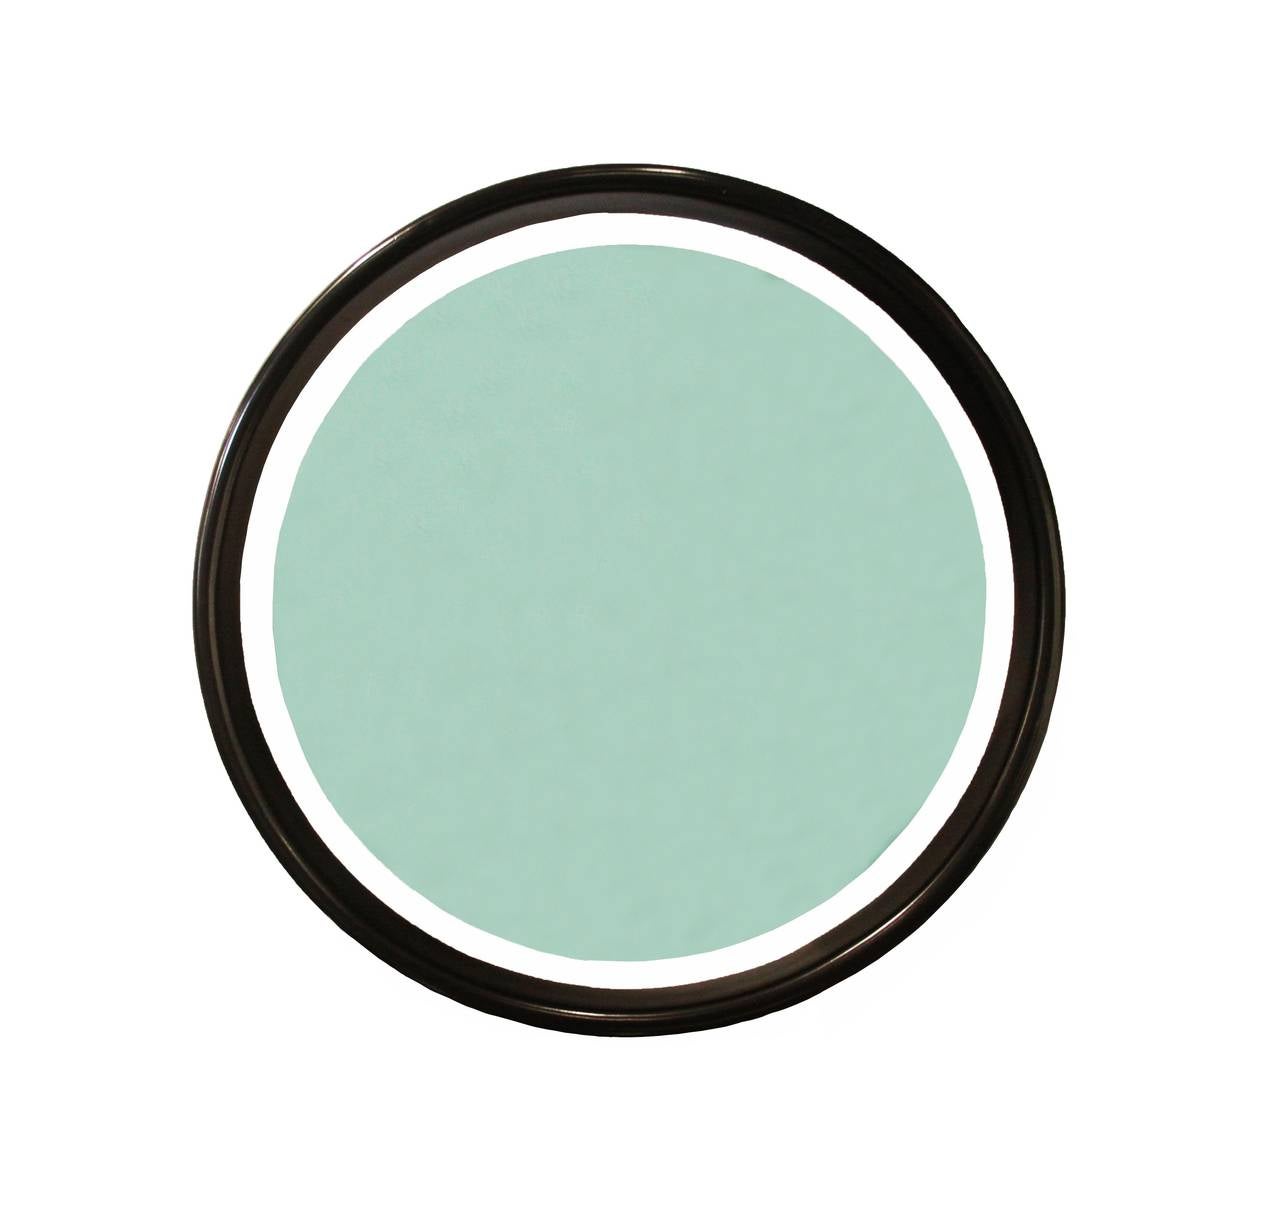 Round mirror that appears to be floating if hung on a white wall, because the backing is white finished wood. The round frame is ebonized wood with satin lacquer finish, and the tinted blue mirror is held in place with small chrome tabs. 

Many